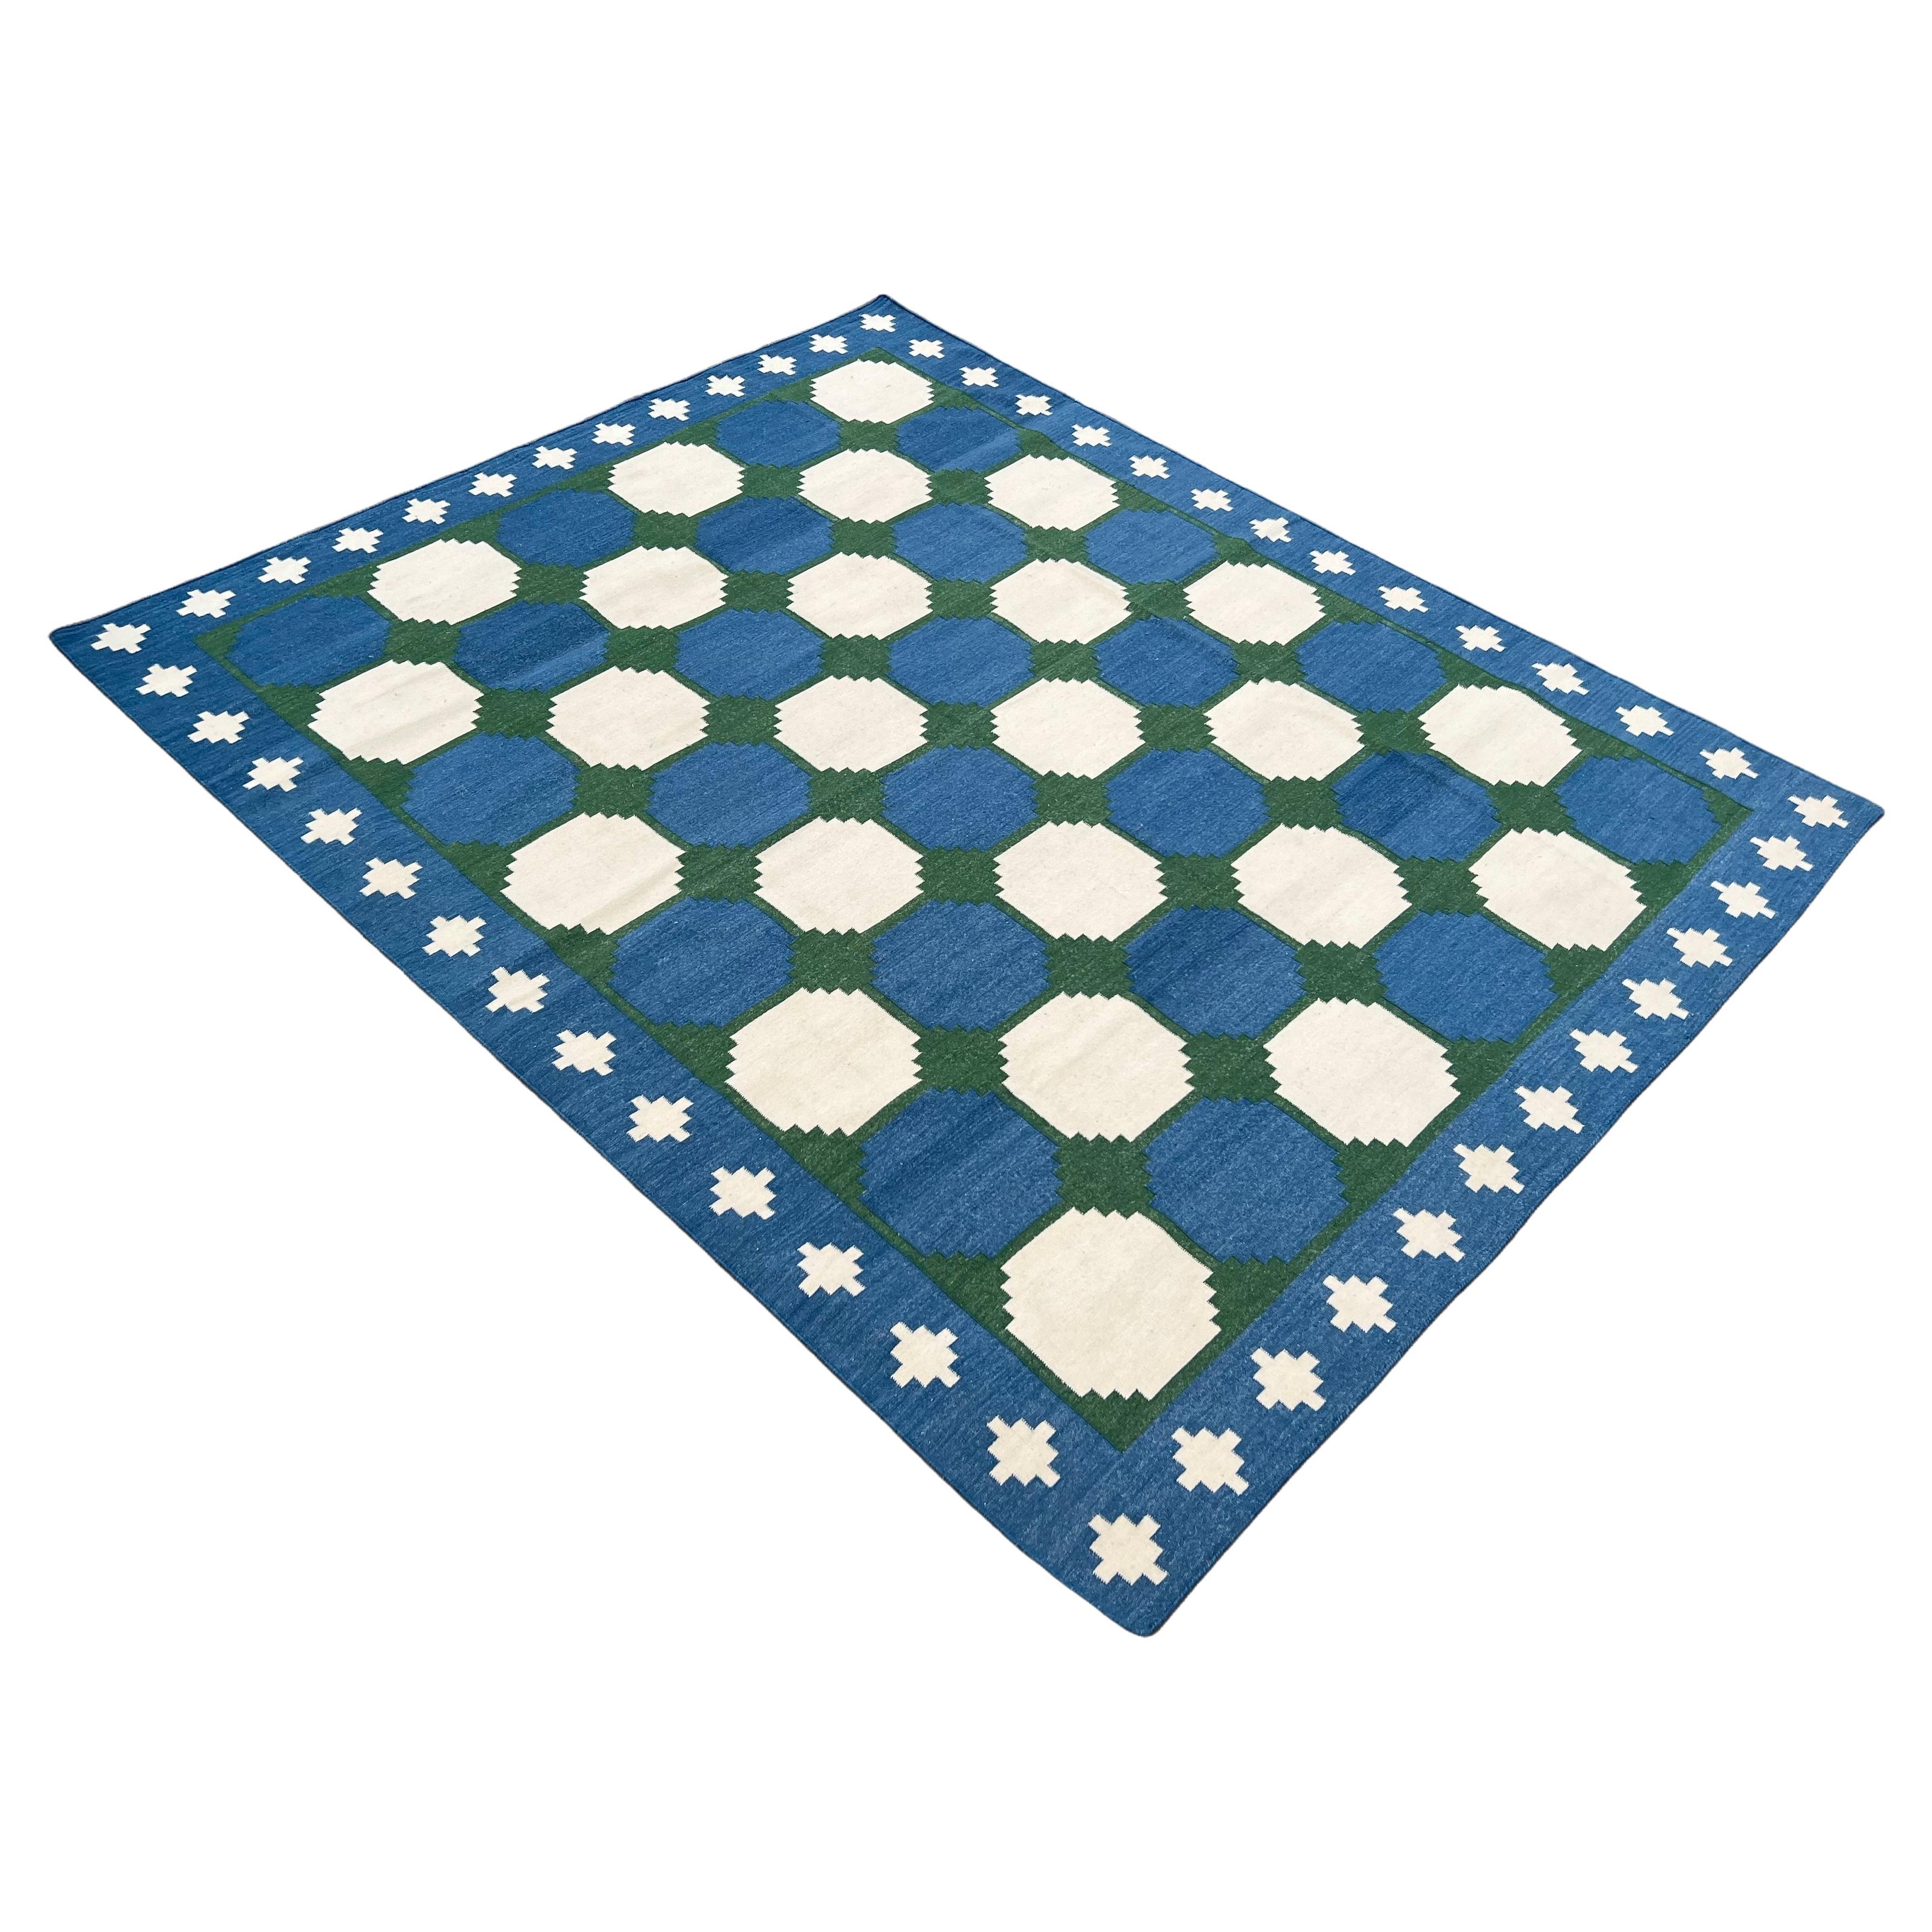 Handmade Woolen Area Flat Weave Rug, 8x10 Blue And Green Tile Patterned Dhurrie For Sale